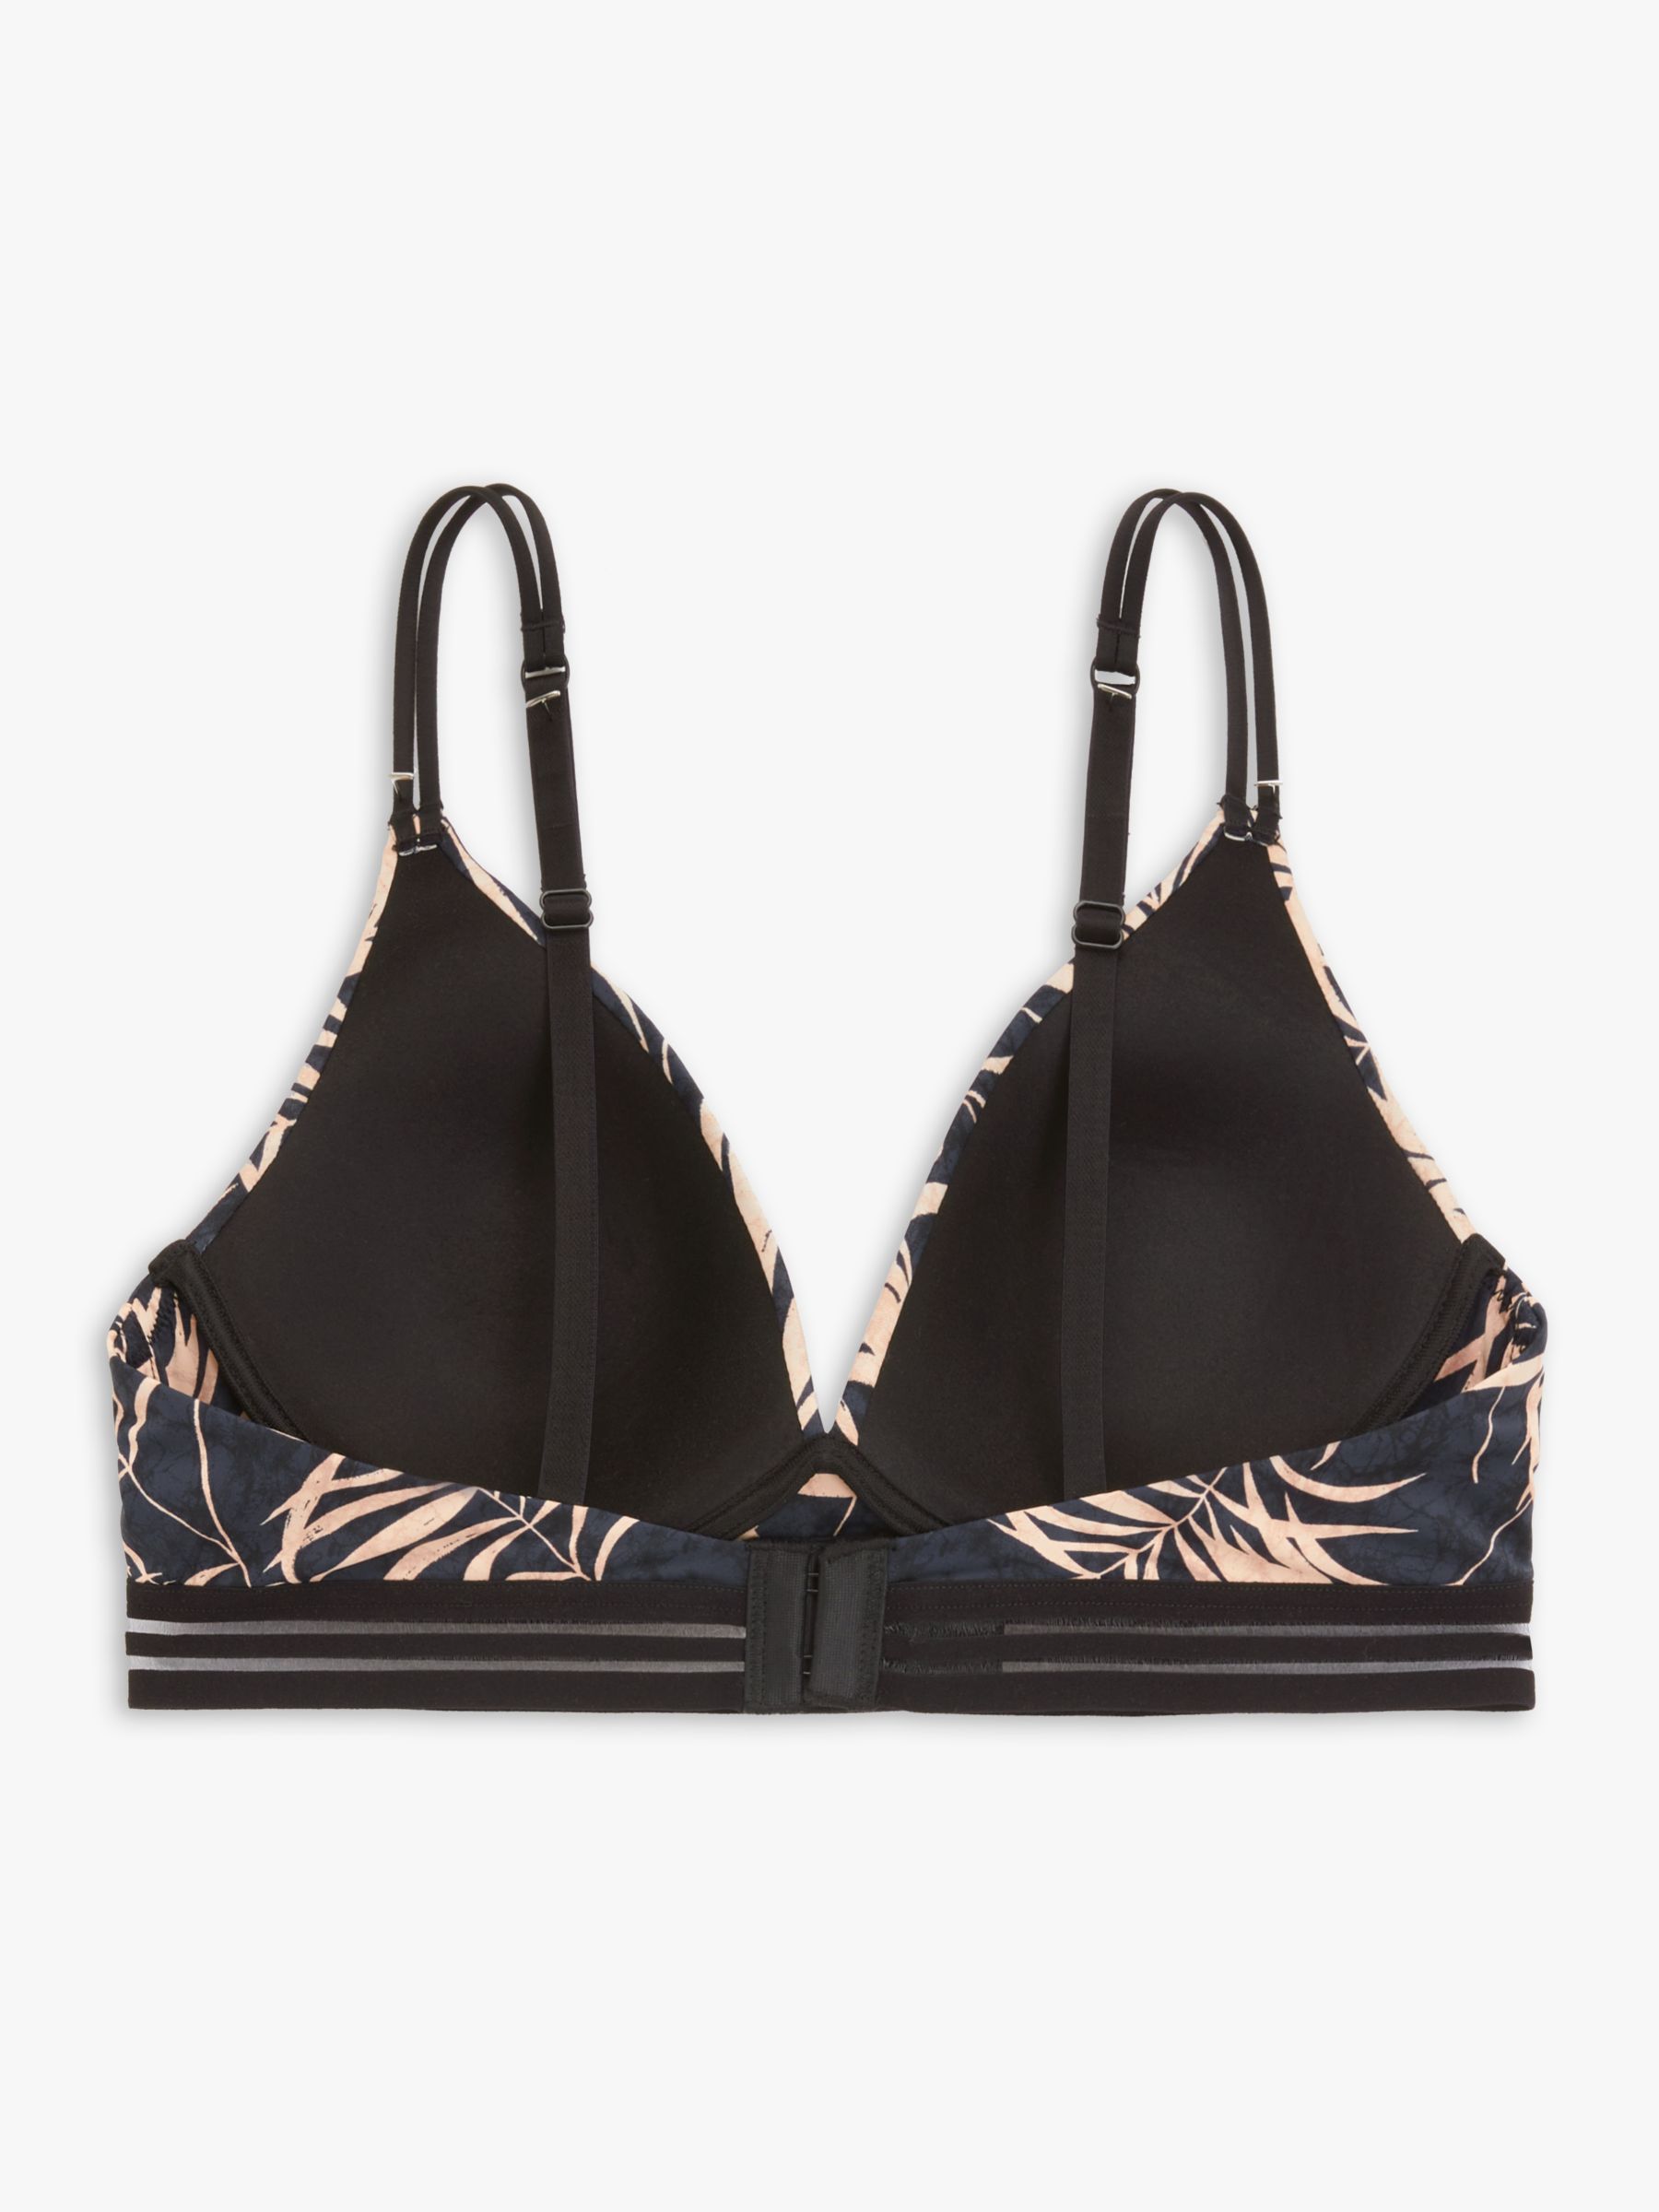 John Lewis Does the Best Lingerie—Here Are Our 19 Picks